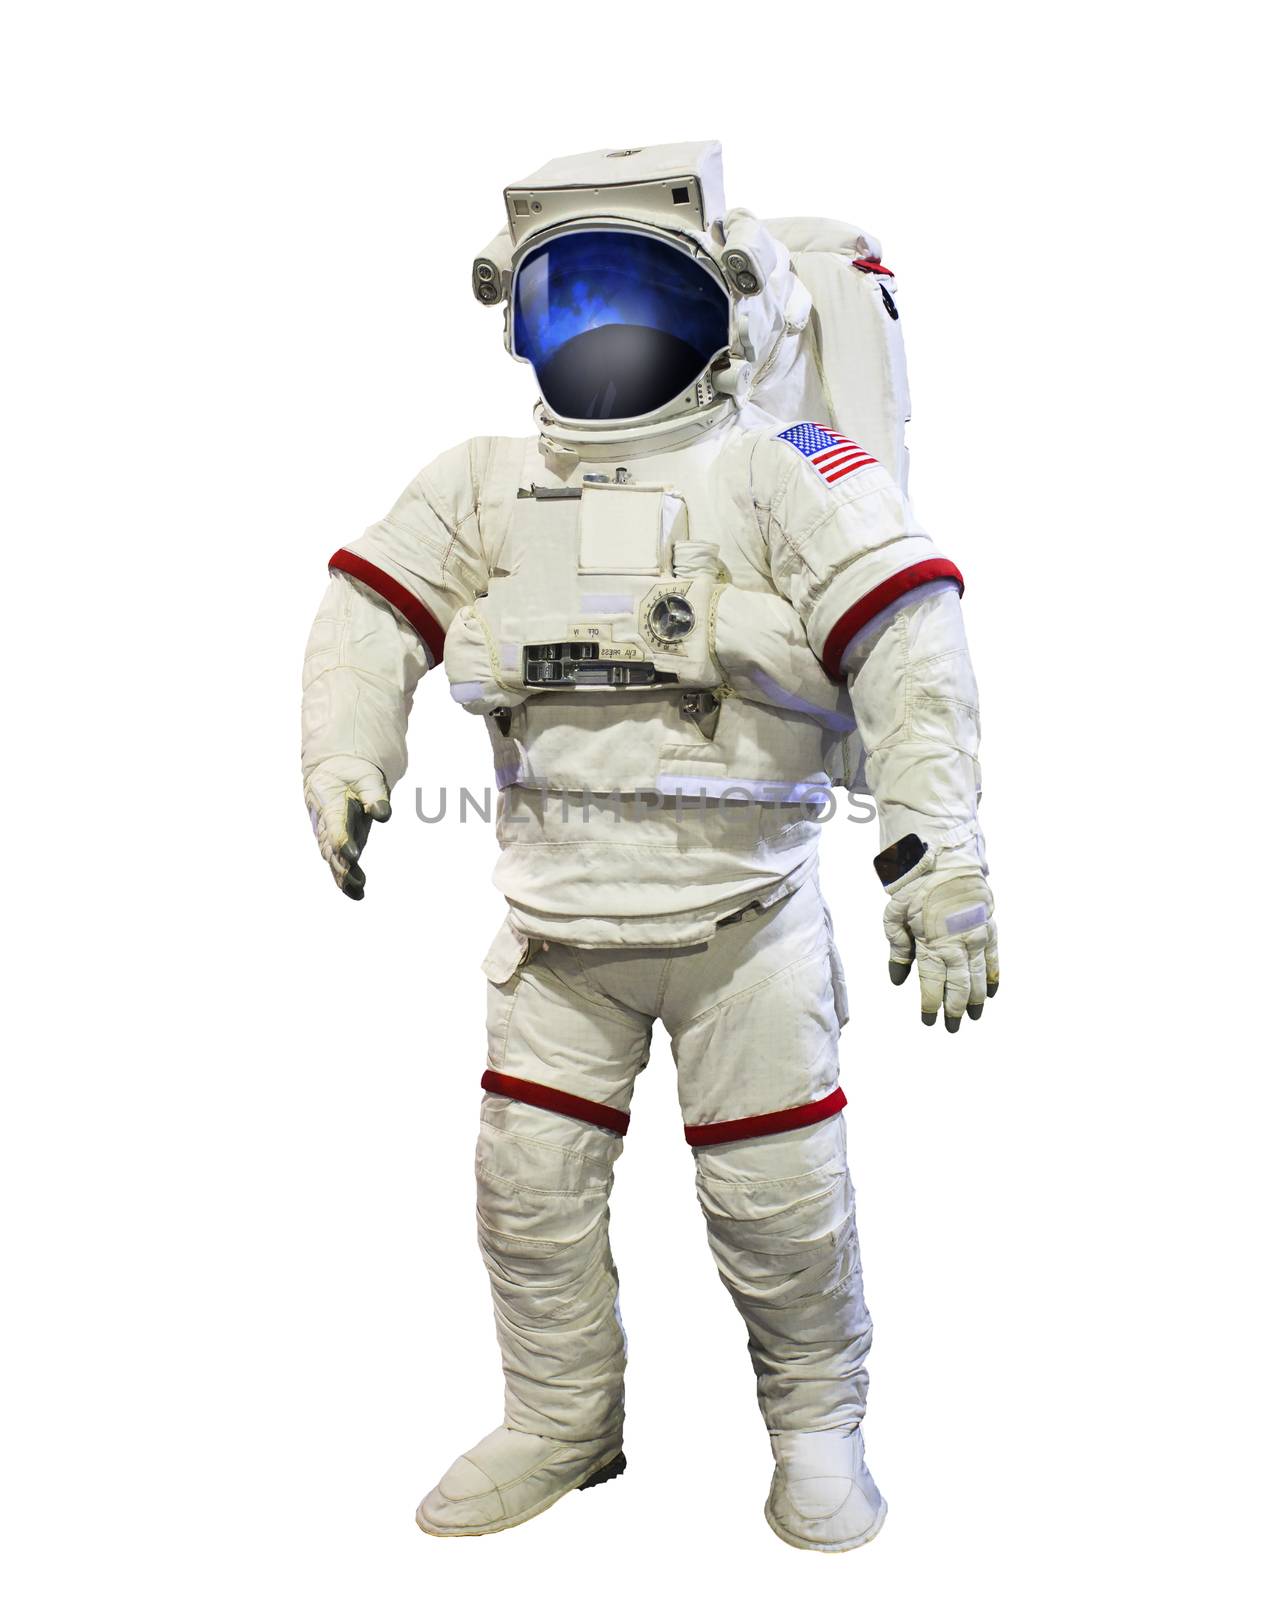 nasa astronaut pressure suit with galaxi space reflection on helmet mask isolated white background use for education and space technology